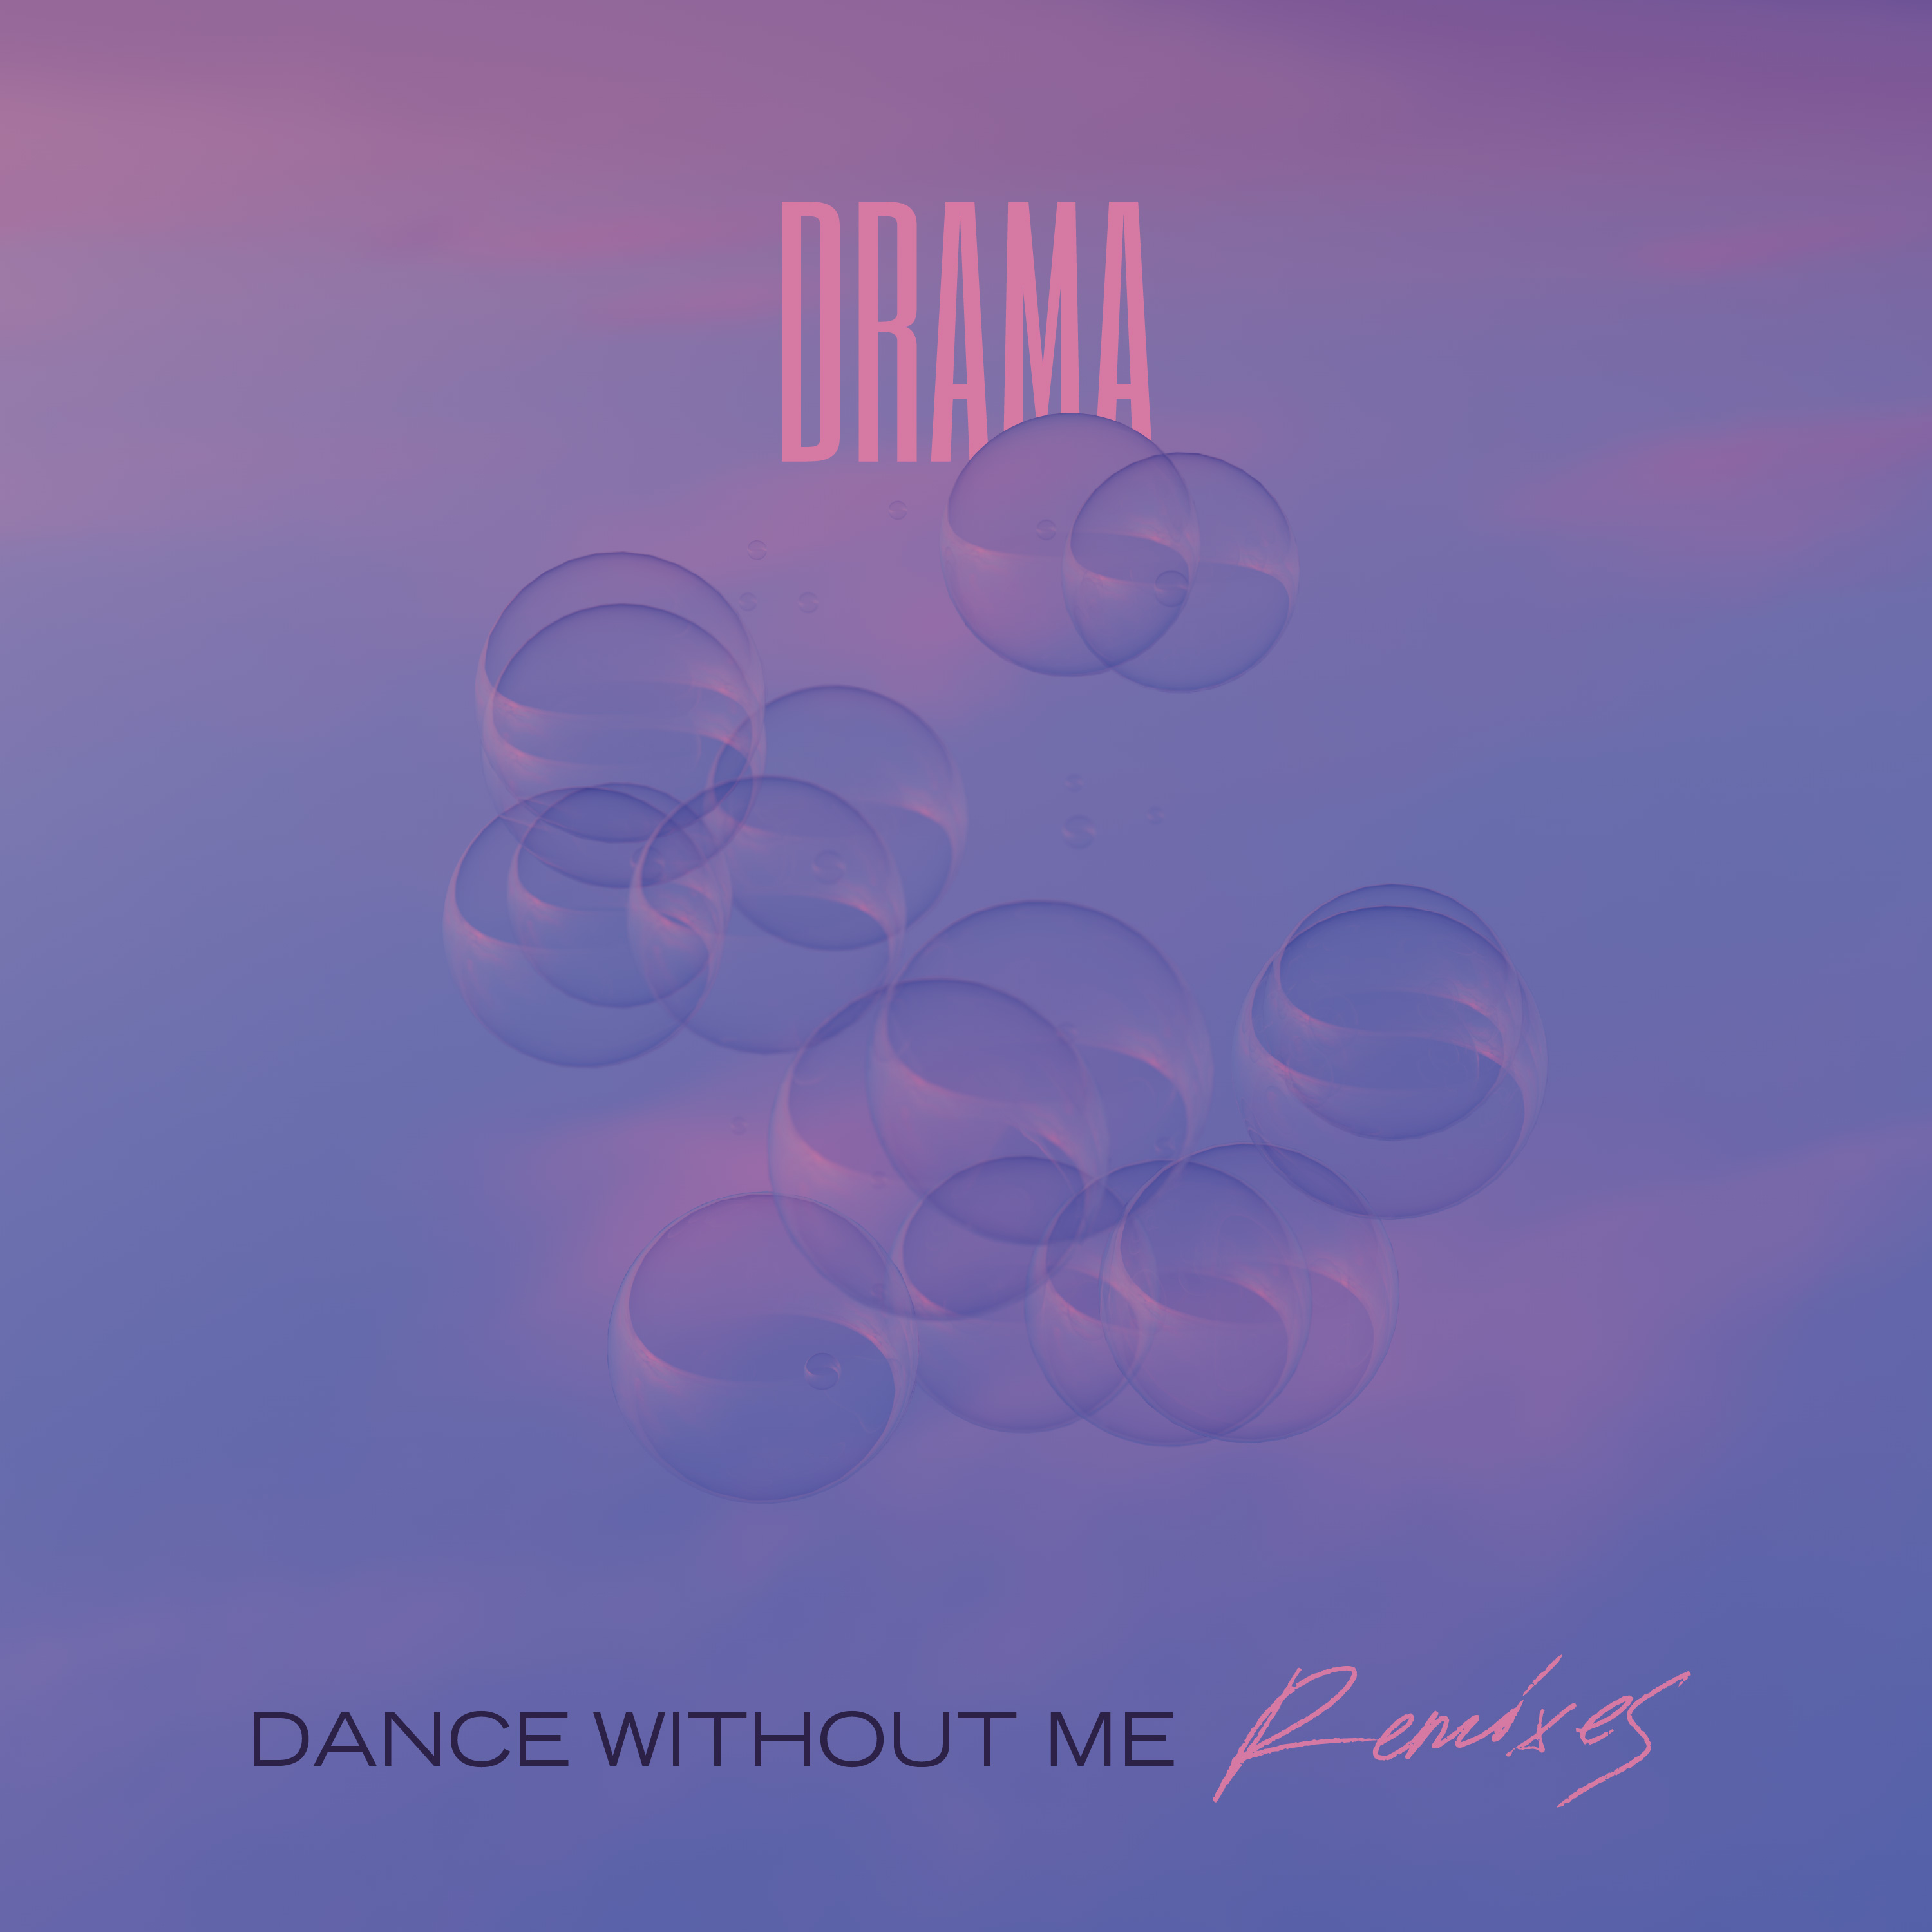 DRAMA's breakout Ghostly International debut, Dance Without Me